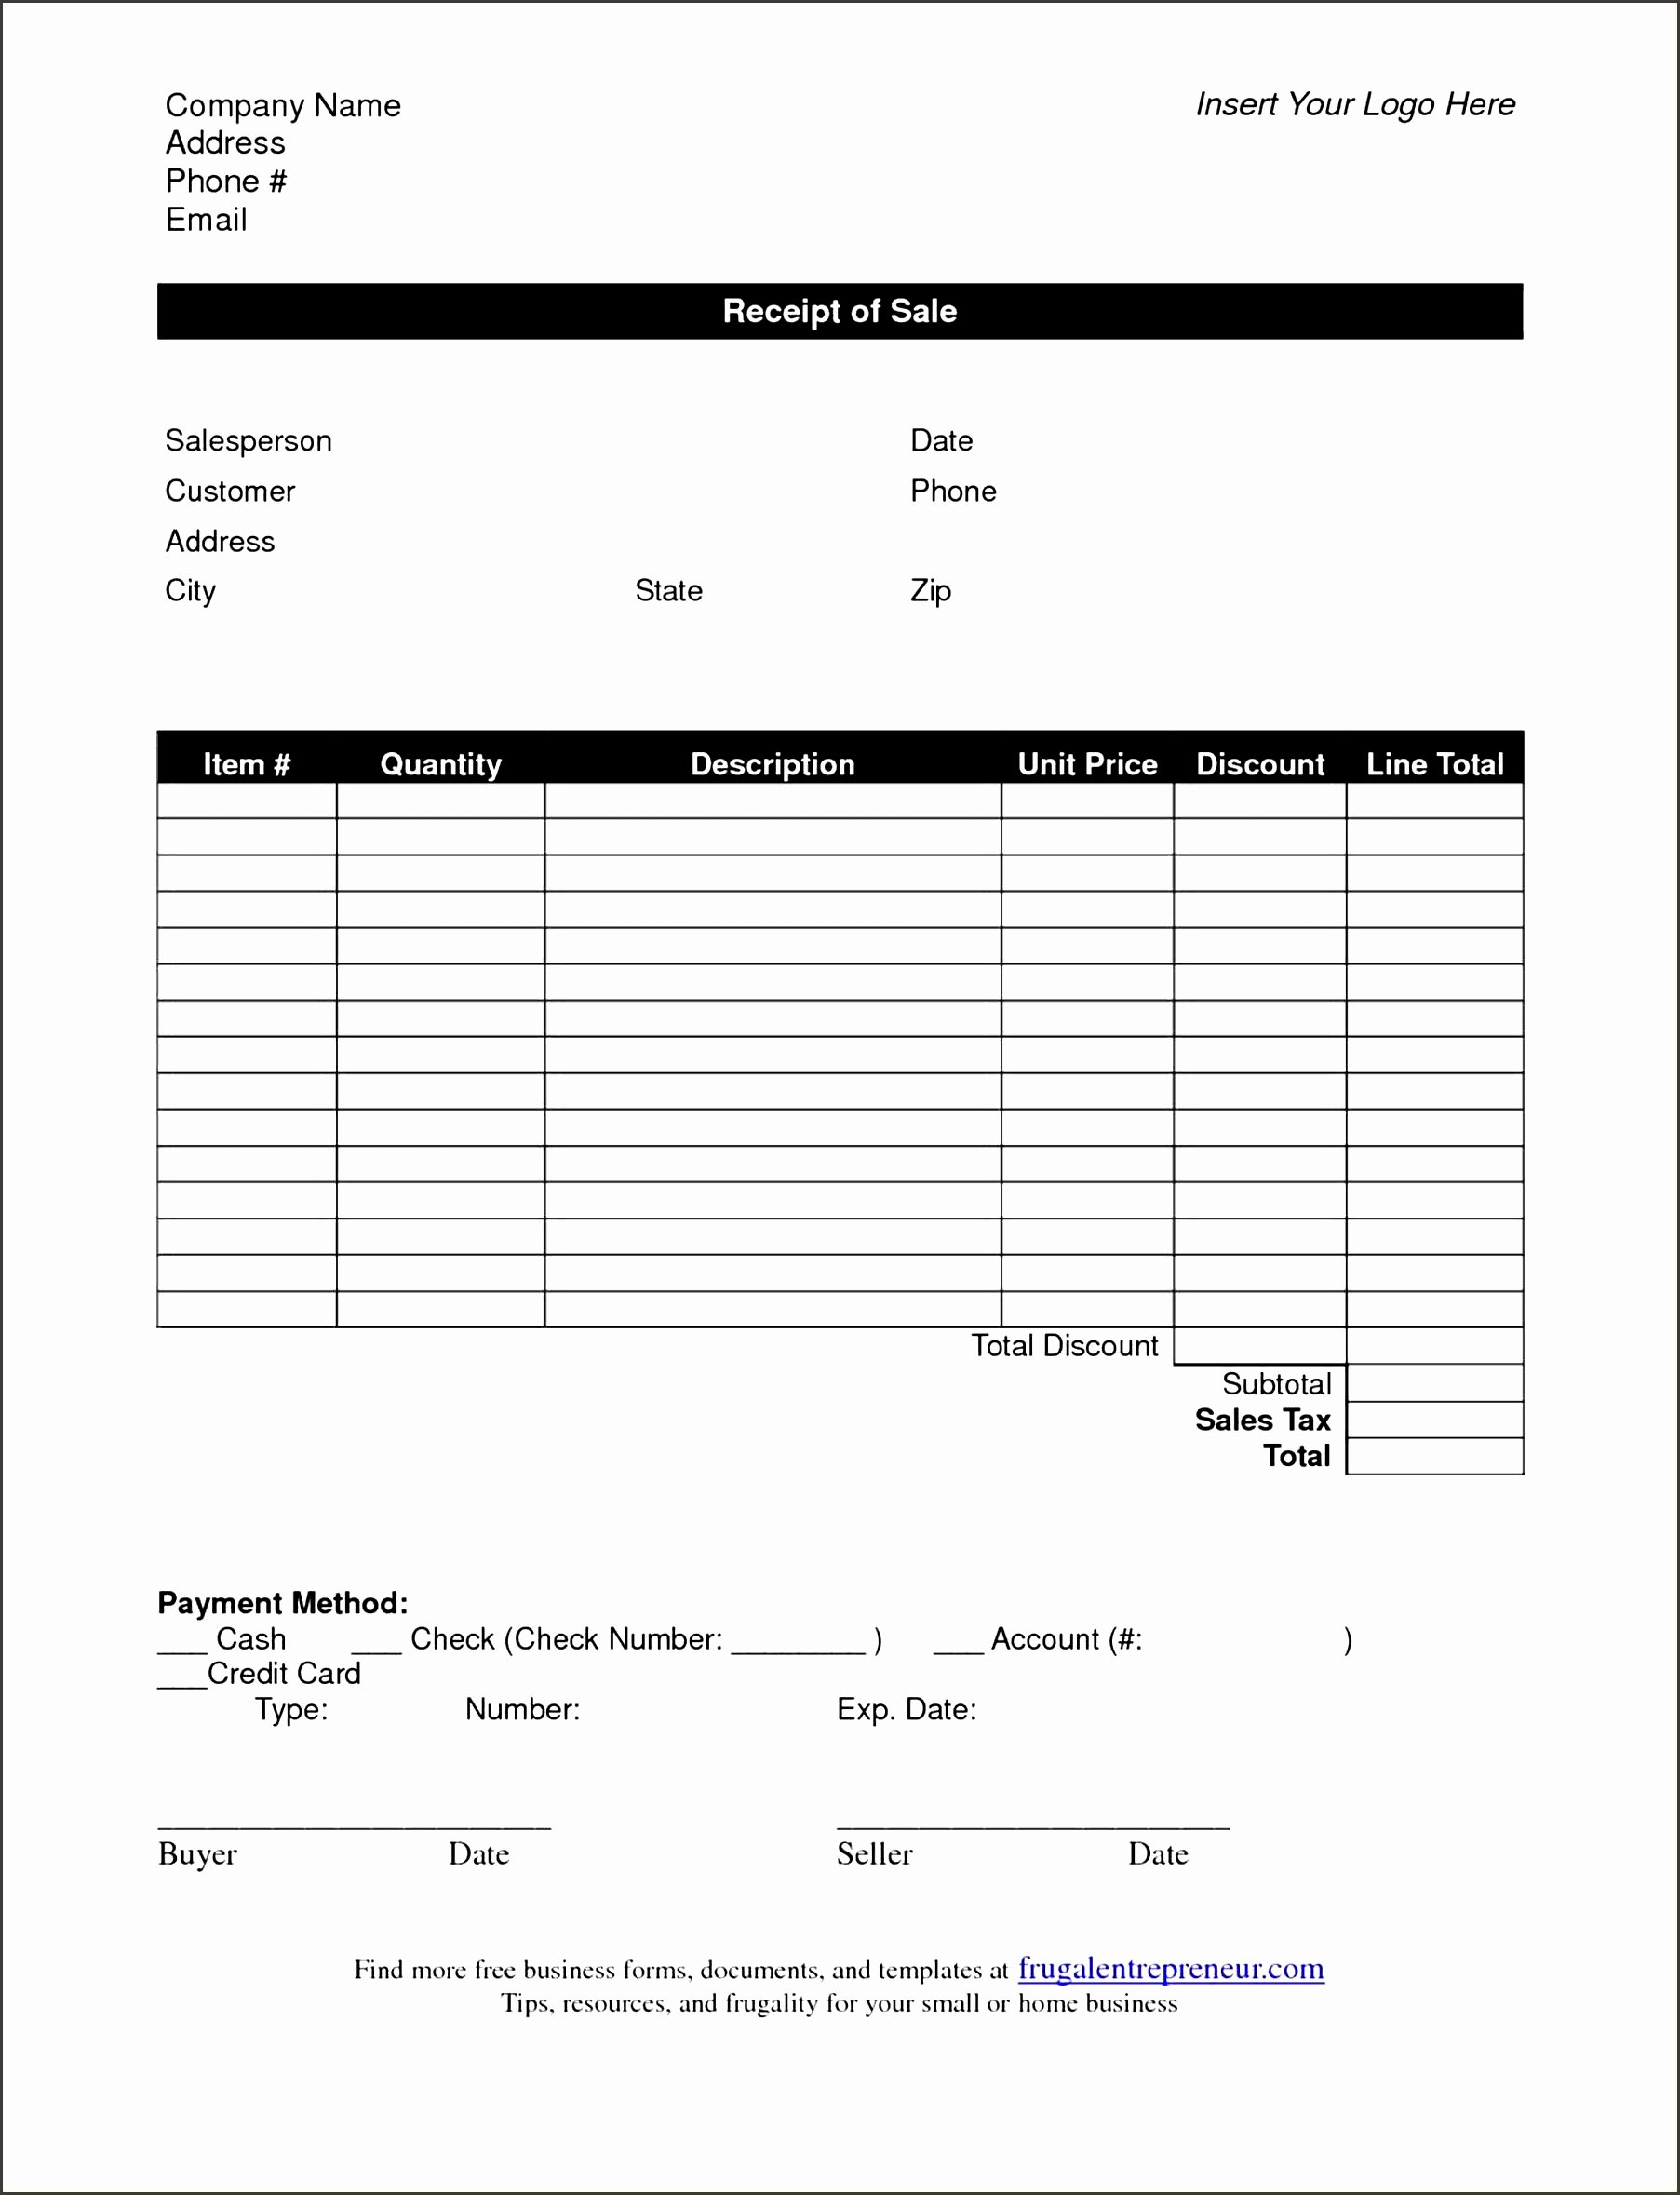 Free Sales Invoice Template New Free Sales Invoice Template – Amandae